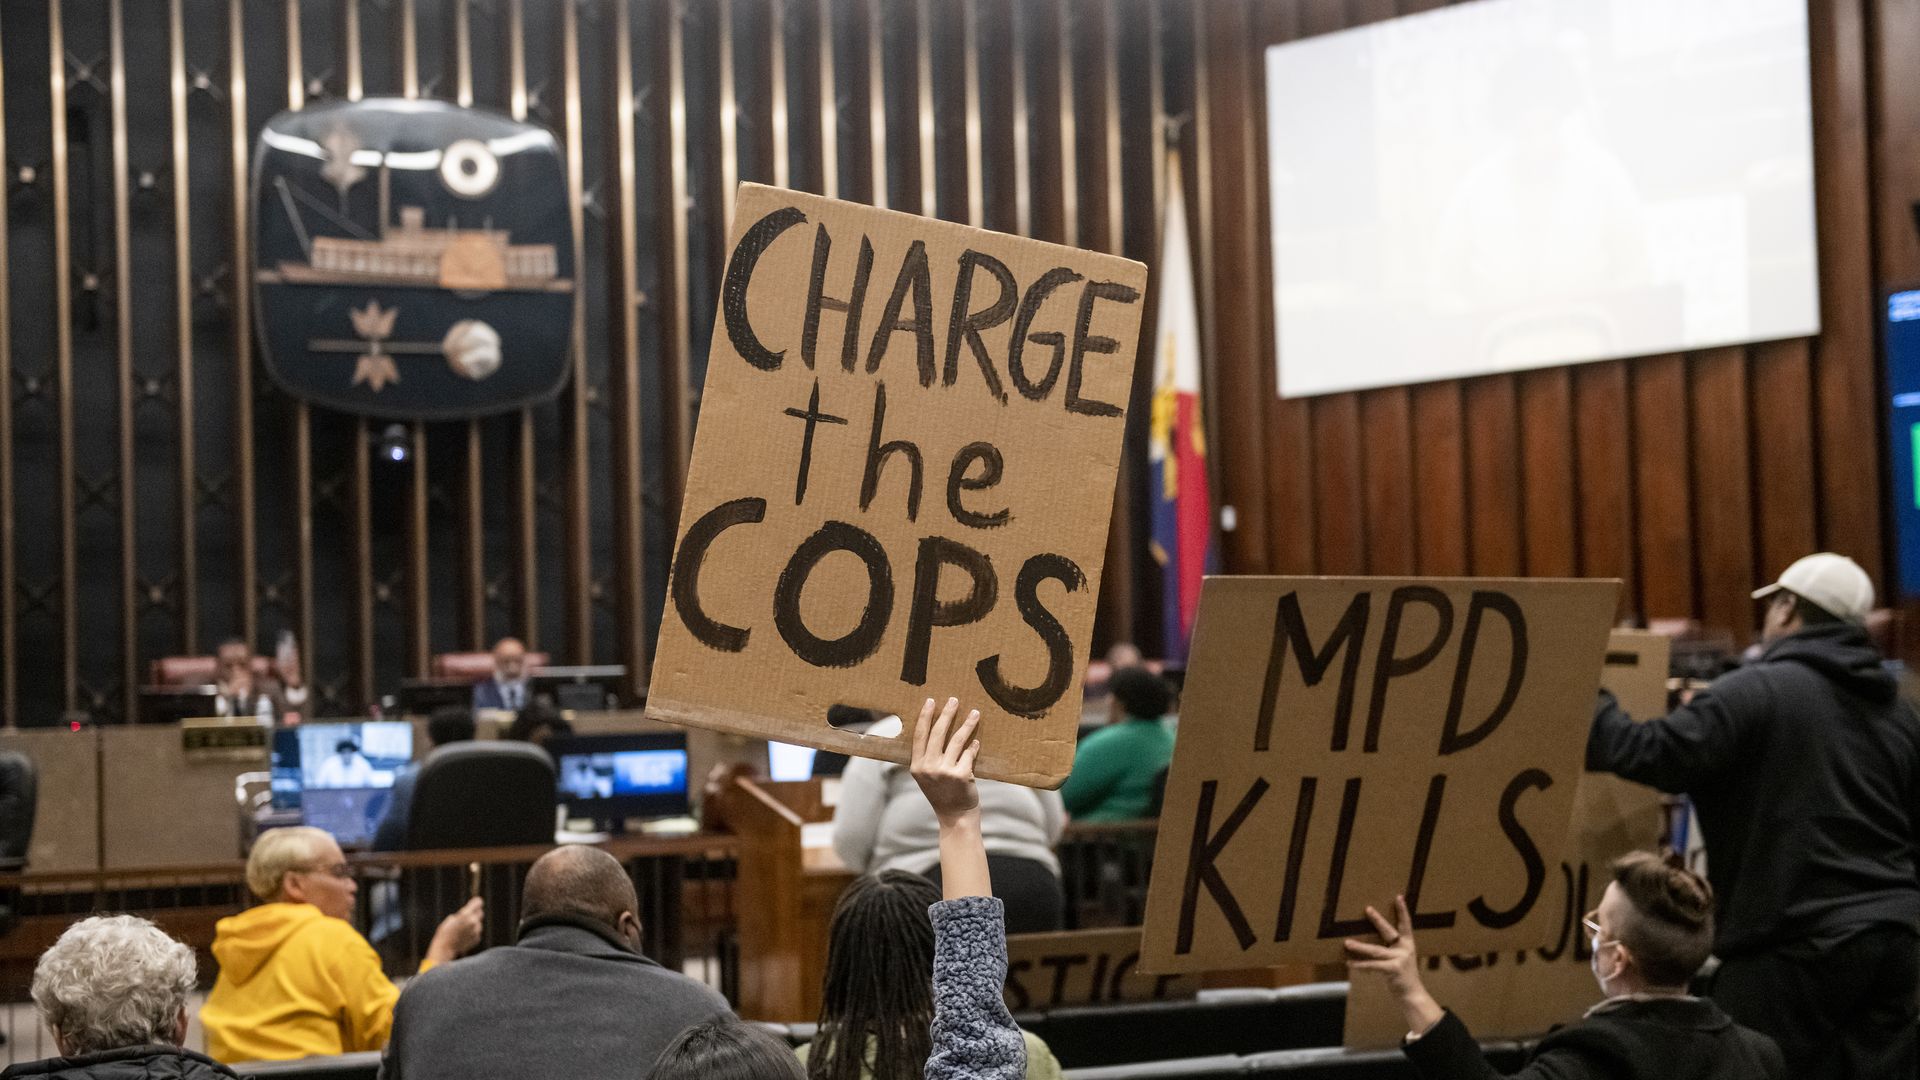 Photo of people holding signs at a Memphis city council meeting, with one marked "Charge the cops" and the other "MPD Kills"